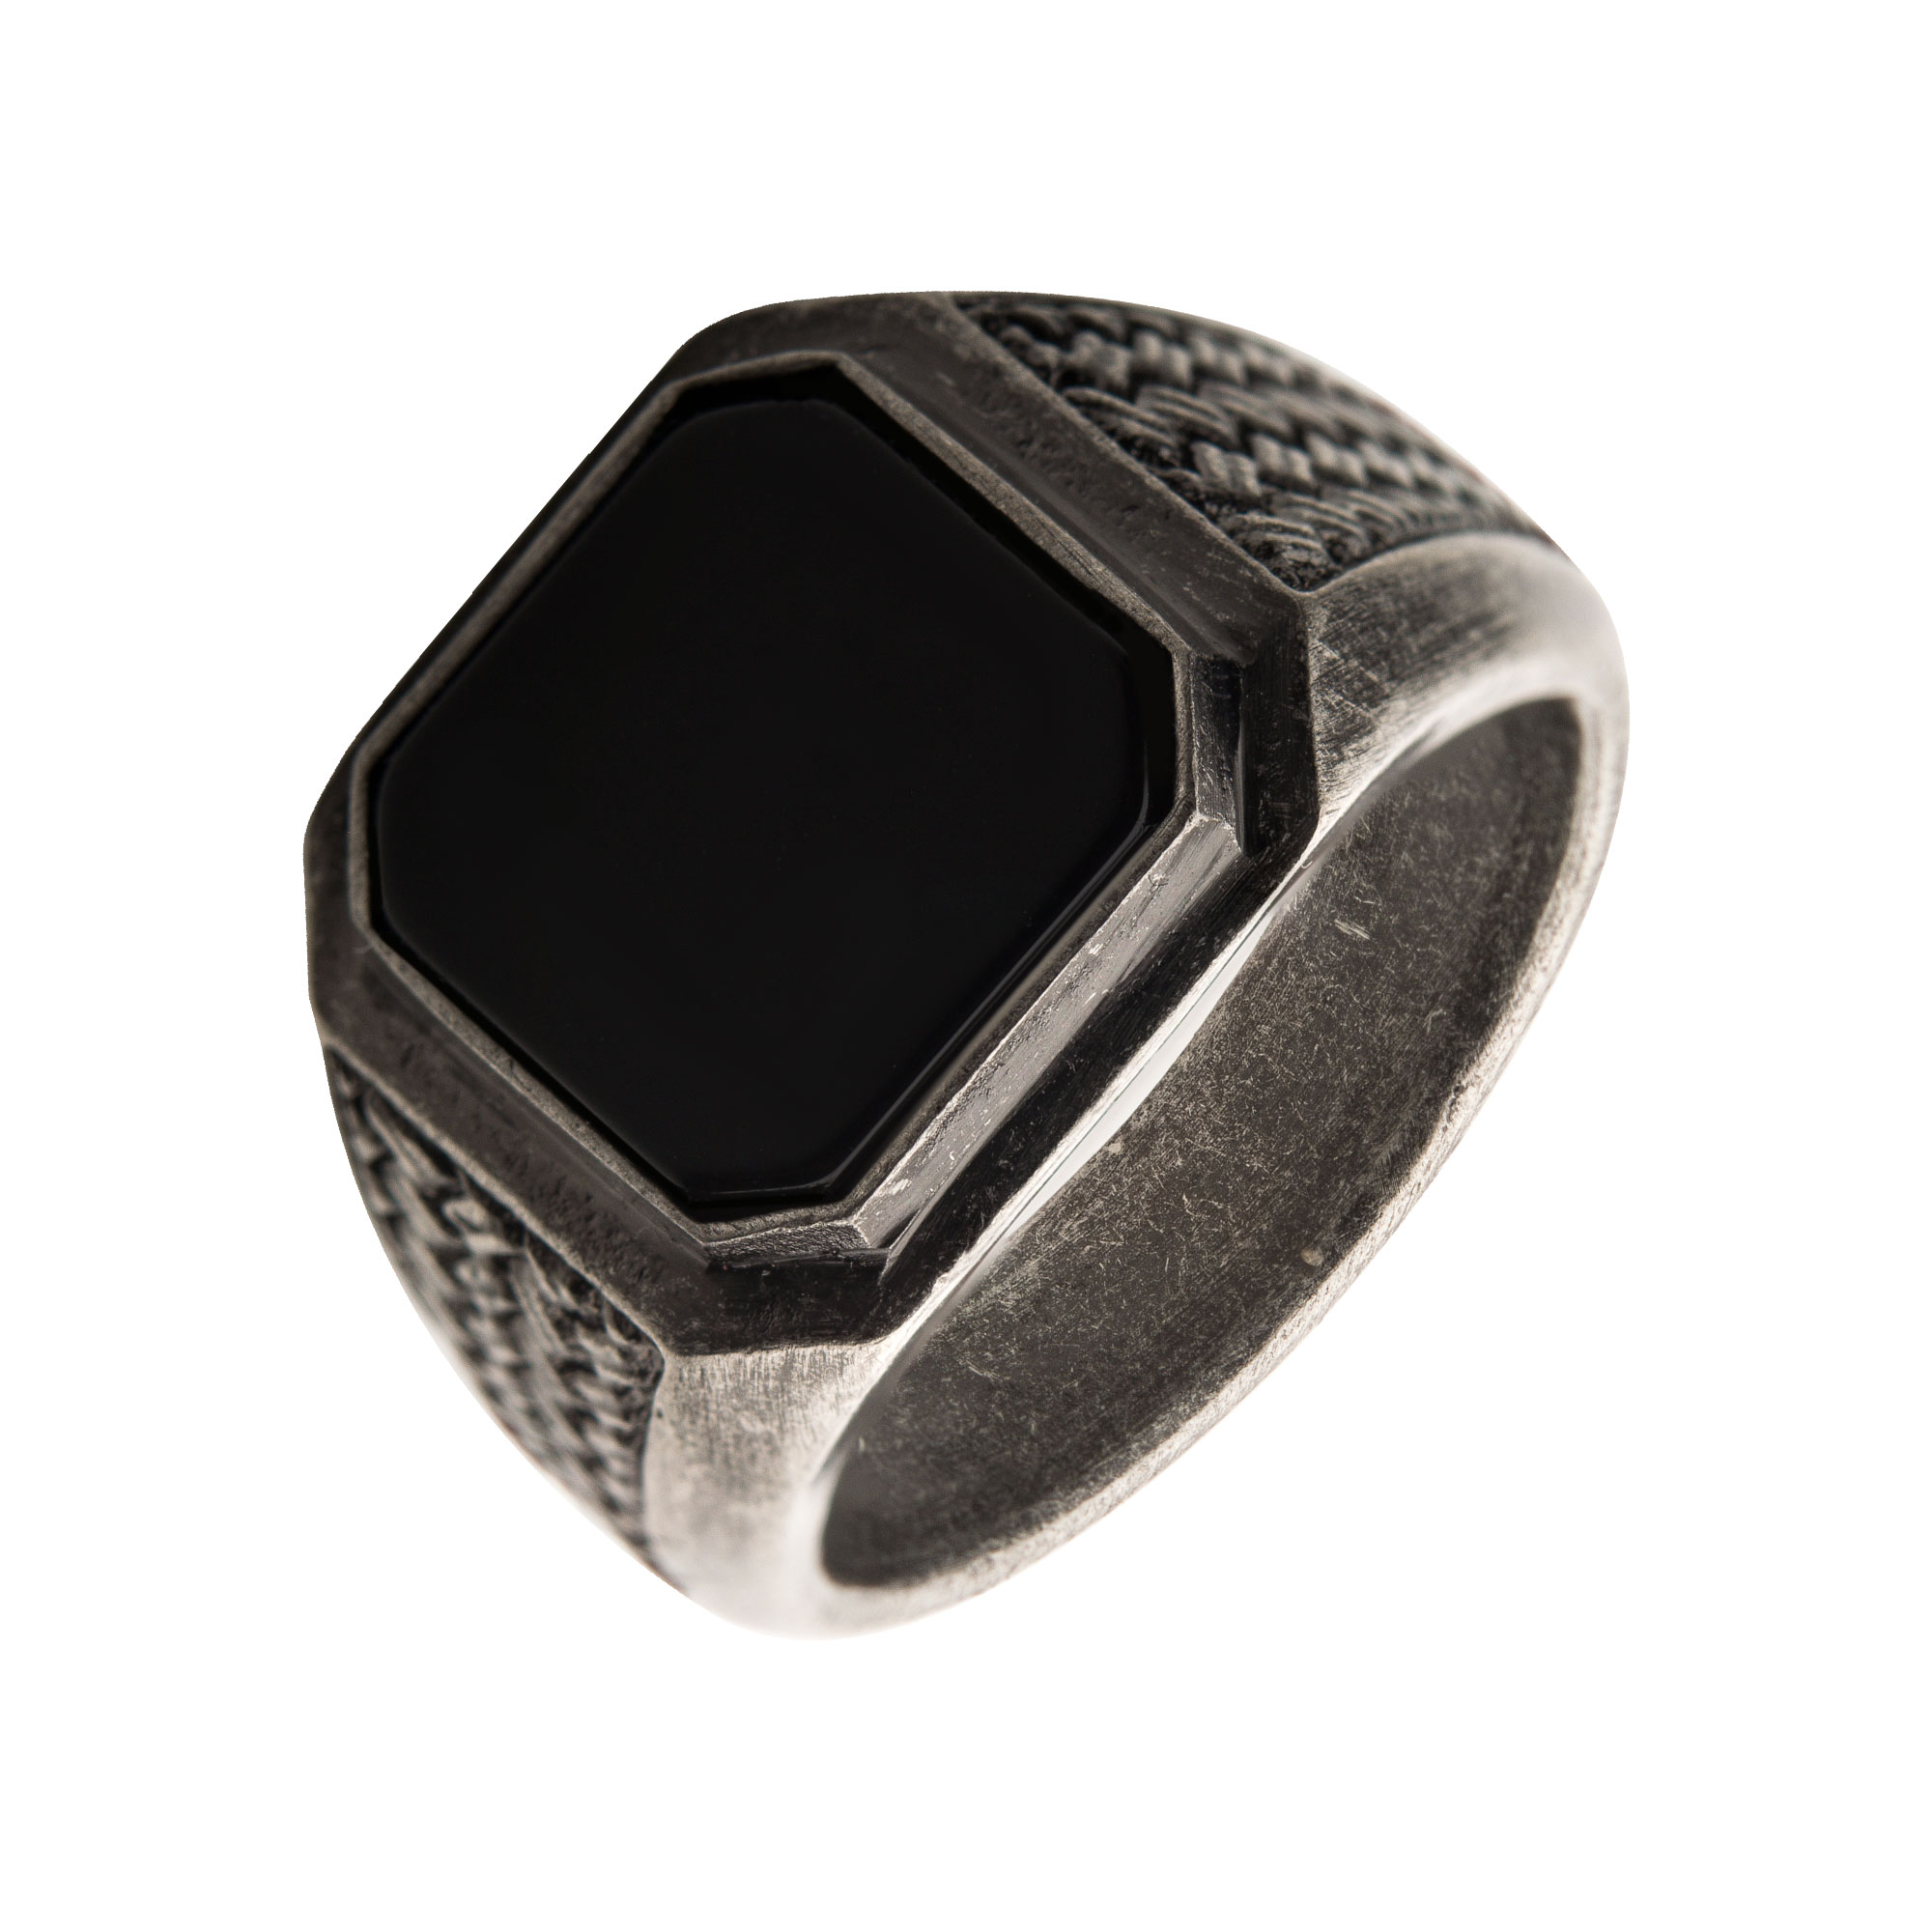 Stainless Steel Silver Plated with Black Agate Stone Ring Ken Walker Jewelers Gig Harbor, WA